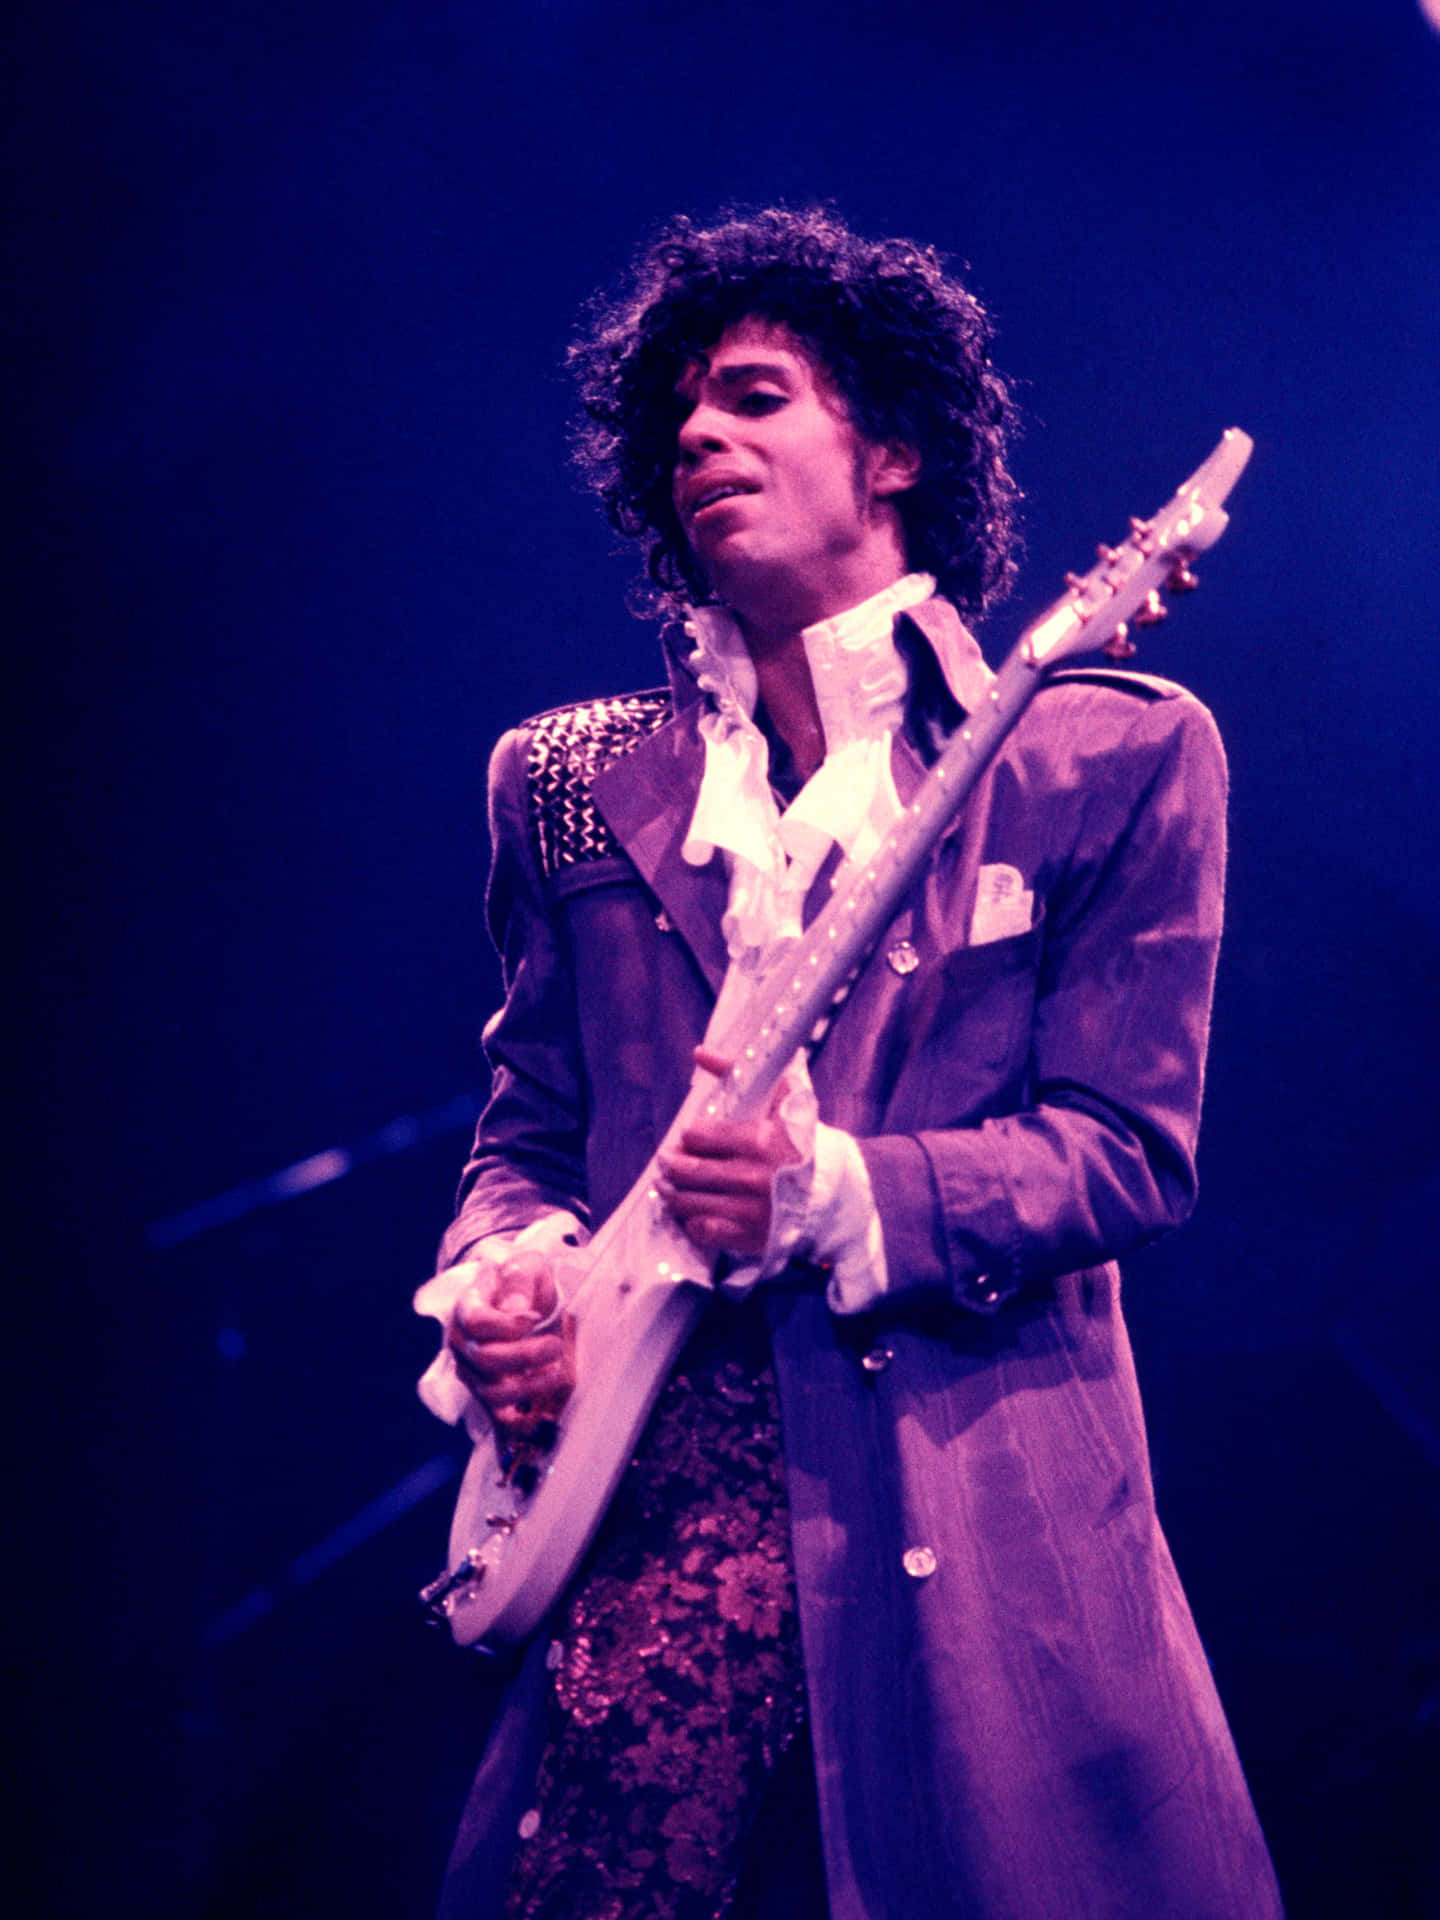 Singer- Songwriter Prince Performs His Legendary Concert at the First Avenue Club